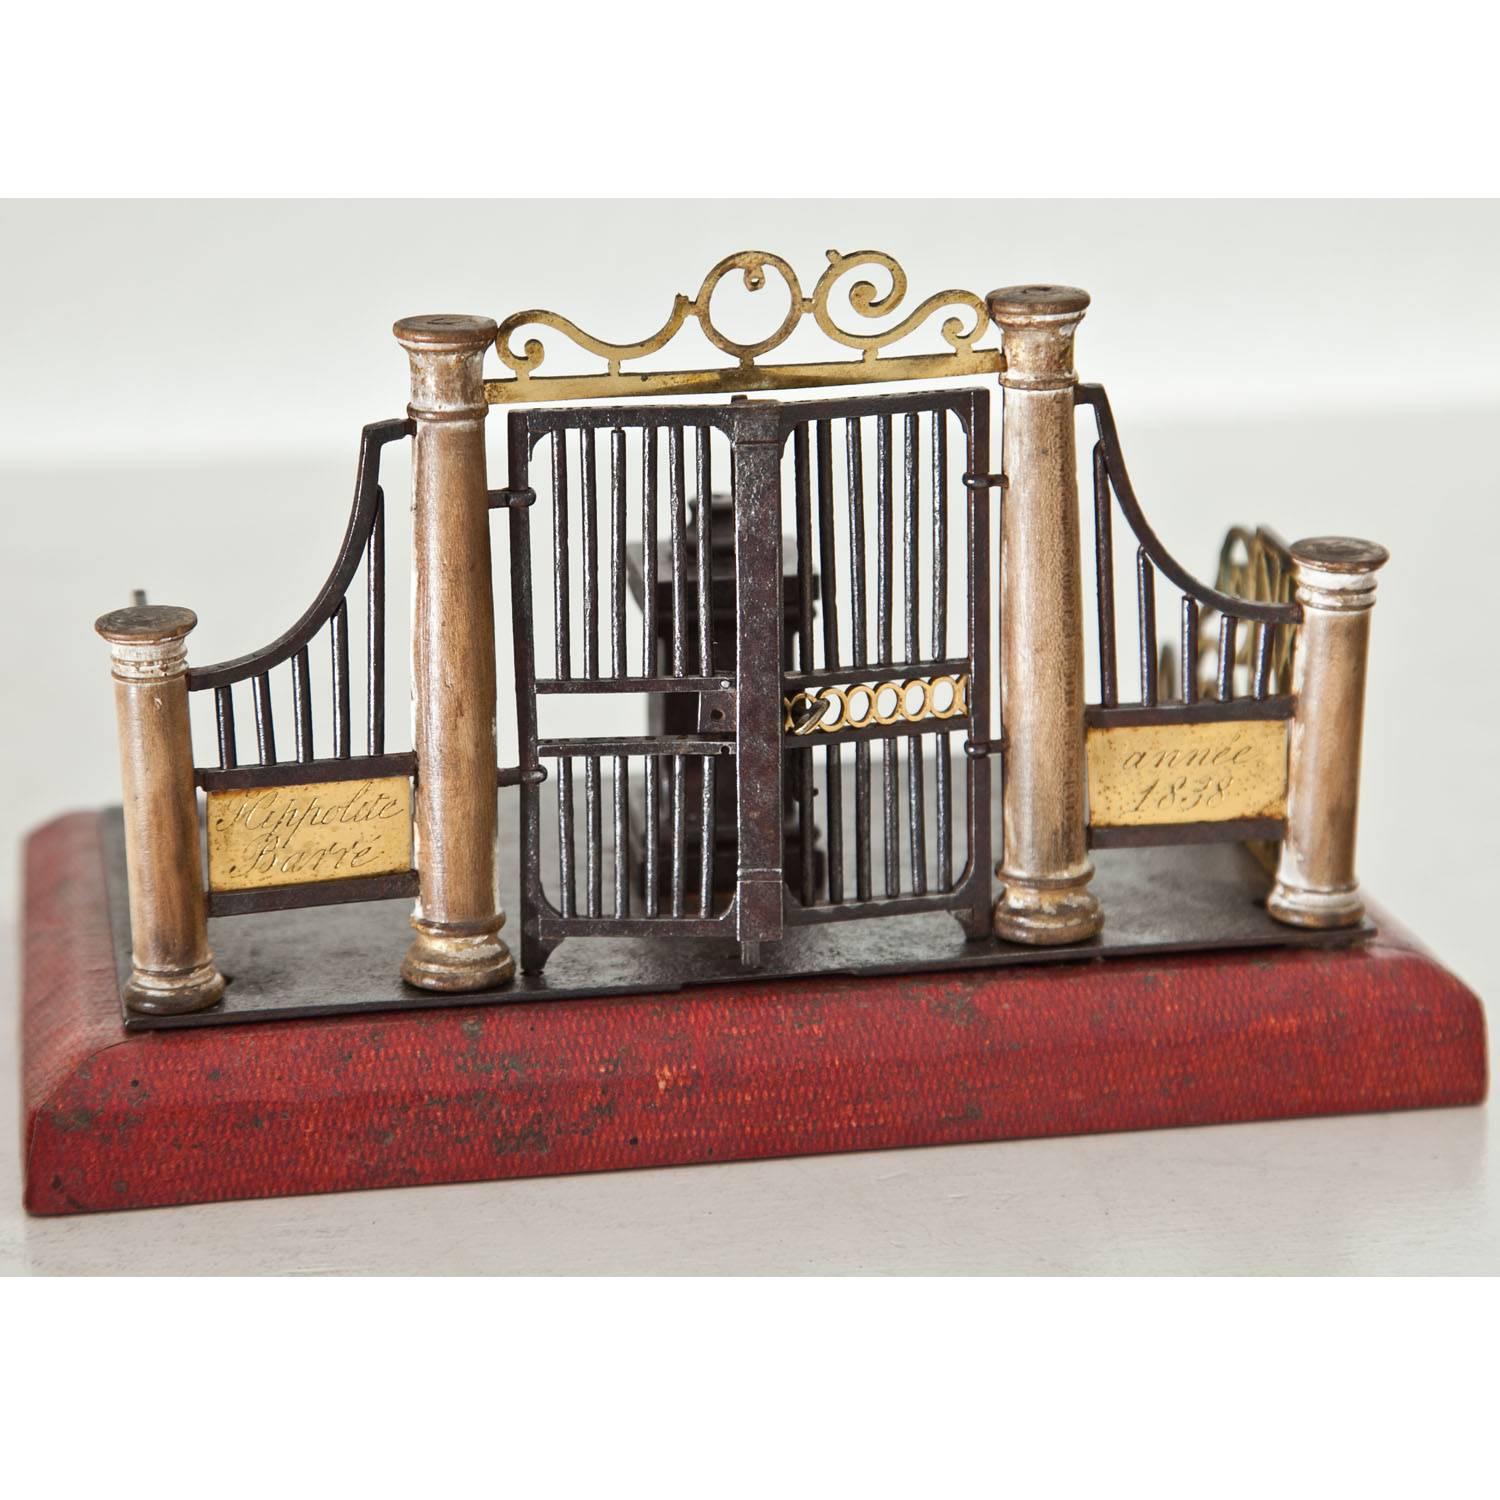 Model of a Gate, France, Dated 1838 2